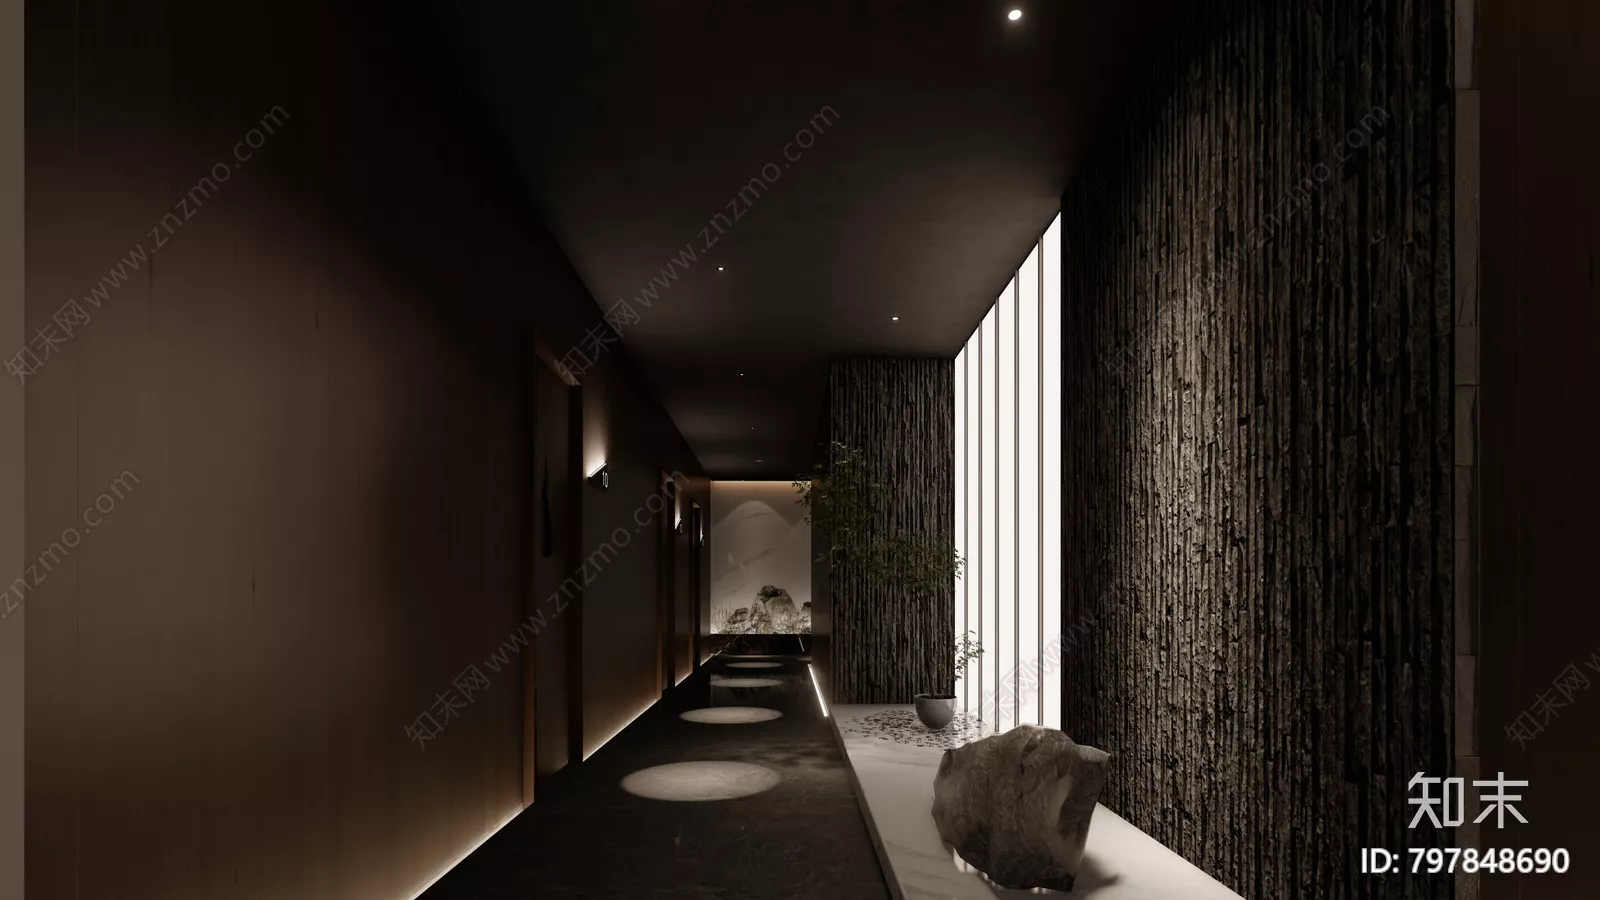 MODERN SPA AND BEAUTY - SKETCHUP 3D SCENE - VRAY OR ENSCAPE - ID14045